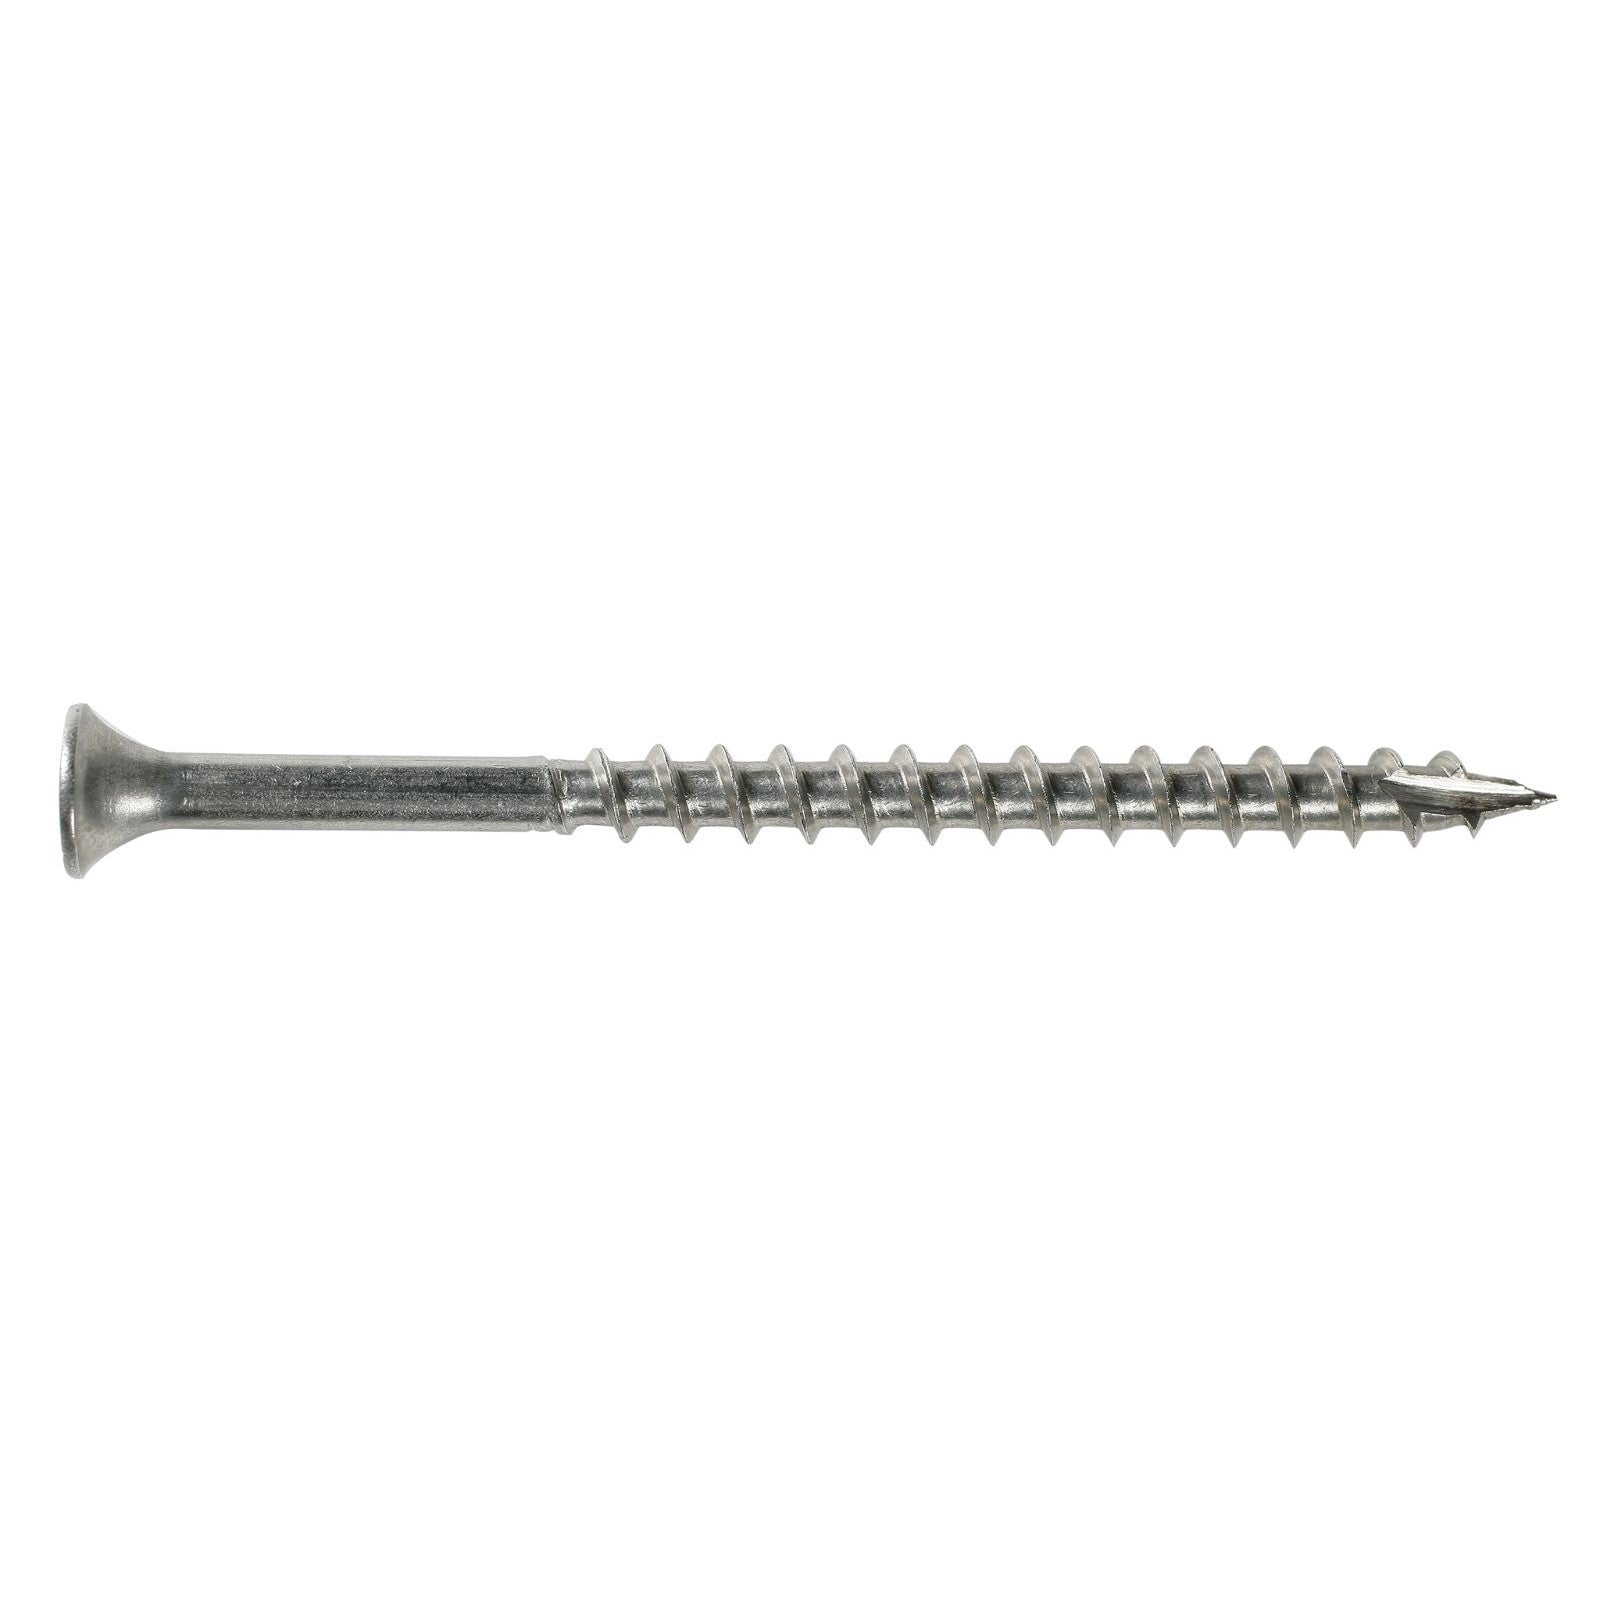 304 Stainless Steel Square Drive Bugle-Head Wood Screw